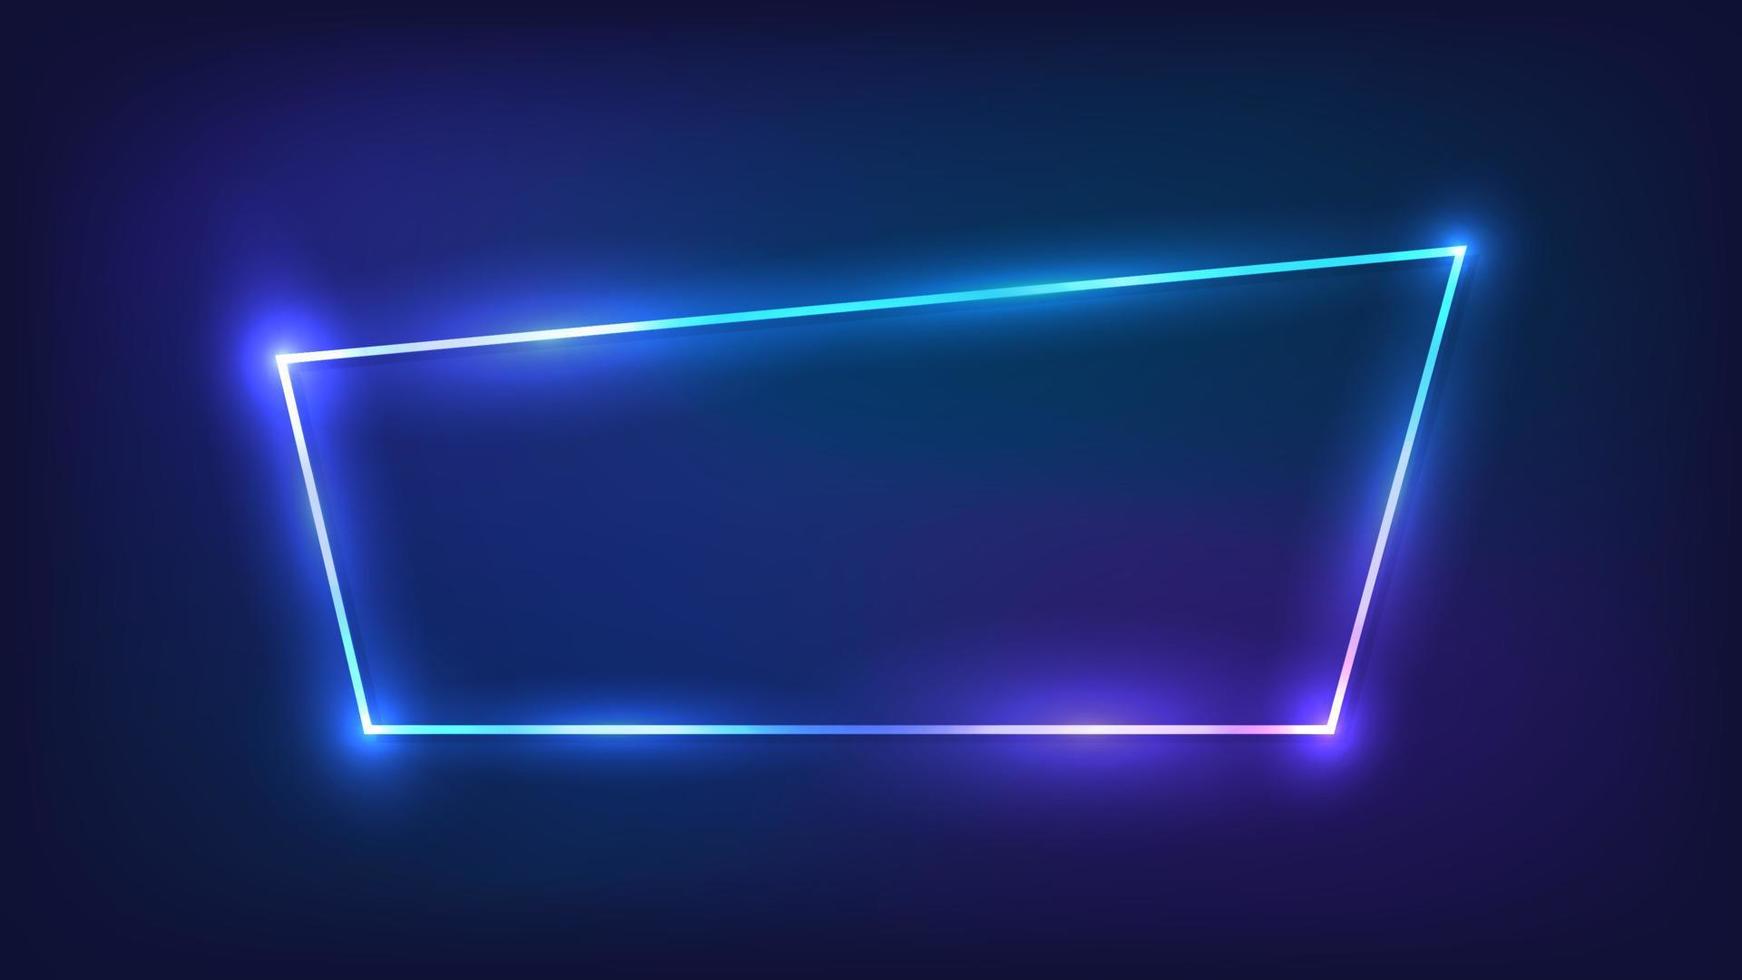 Neon trapezoid frame with shining effects on dark background. Empty glowing techno backdrop. Vector illustration.